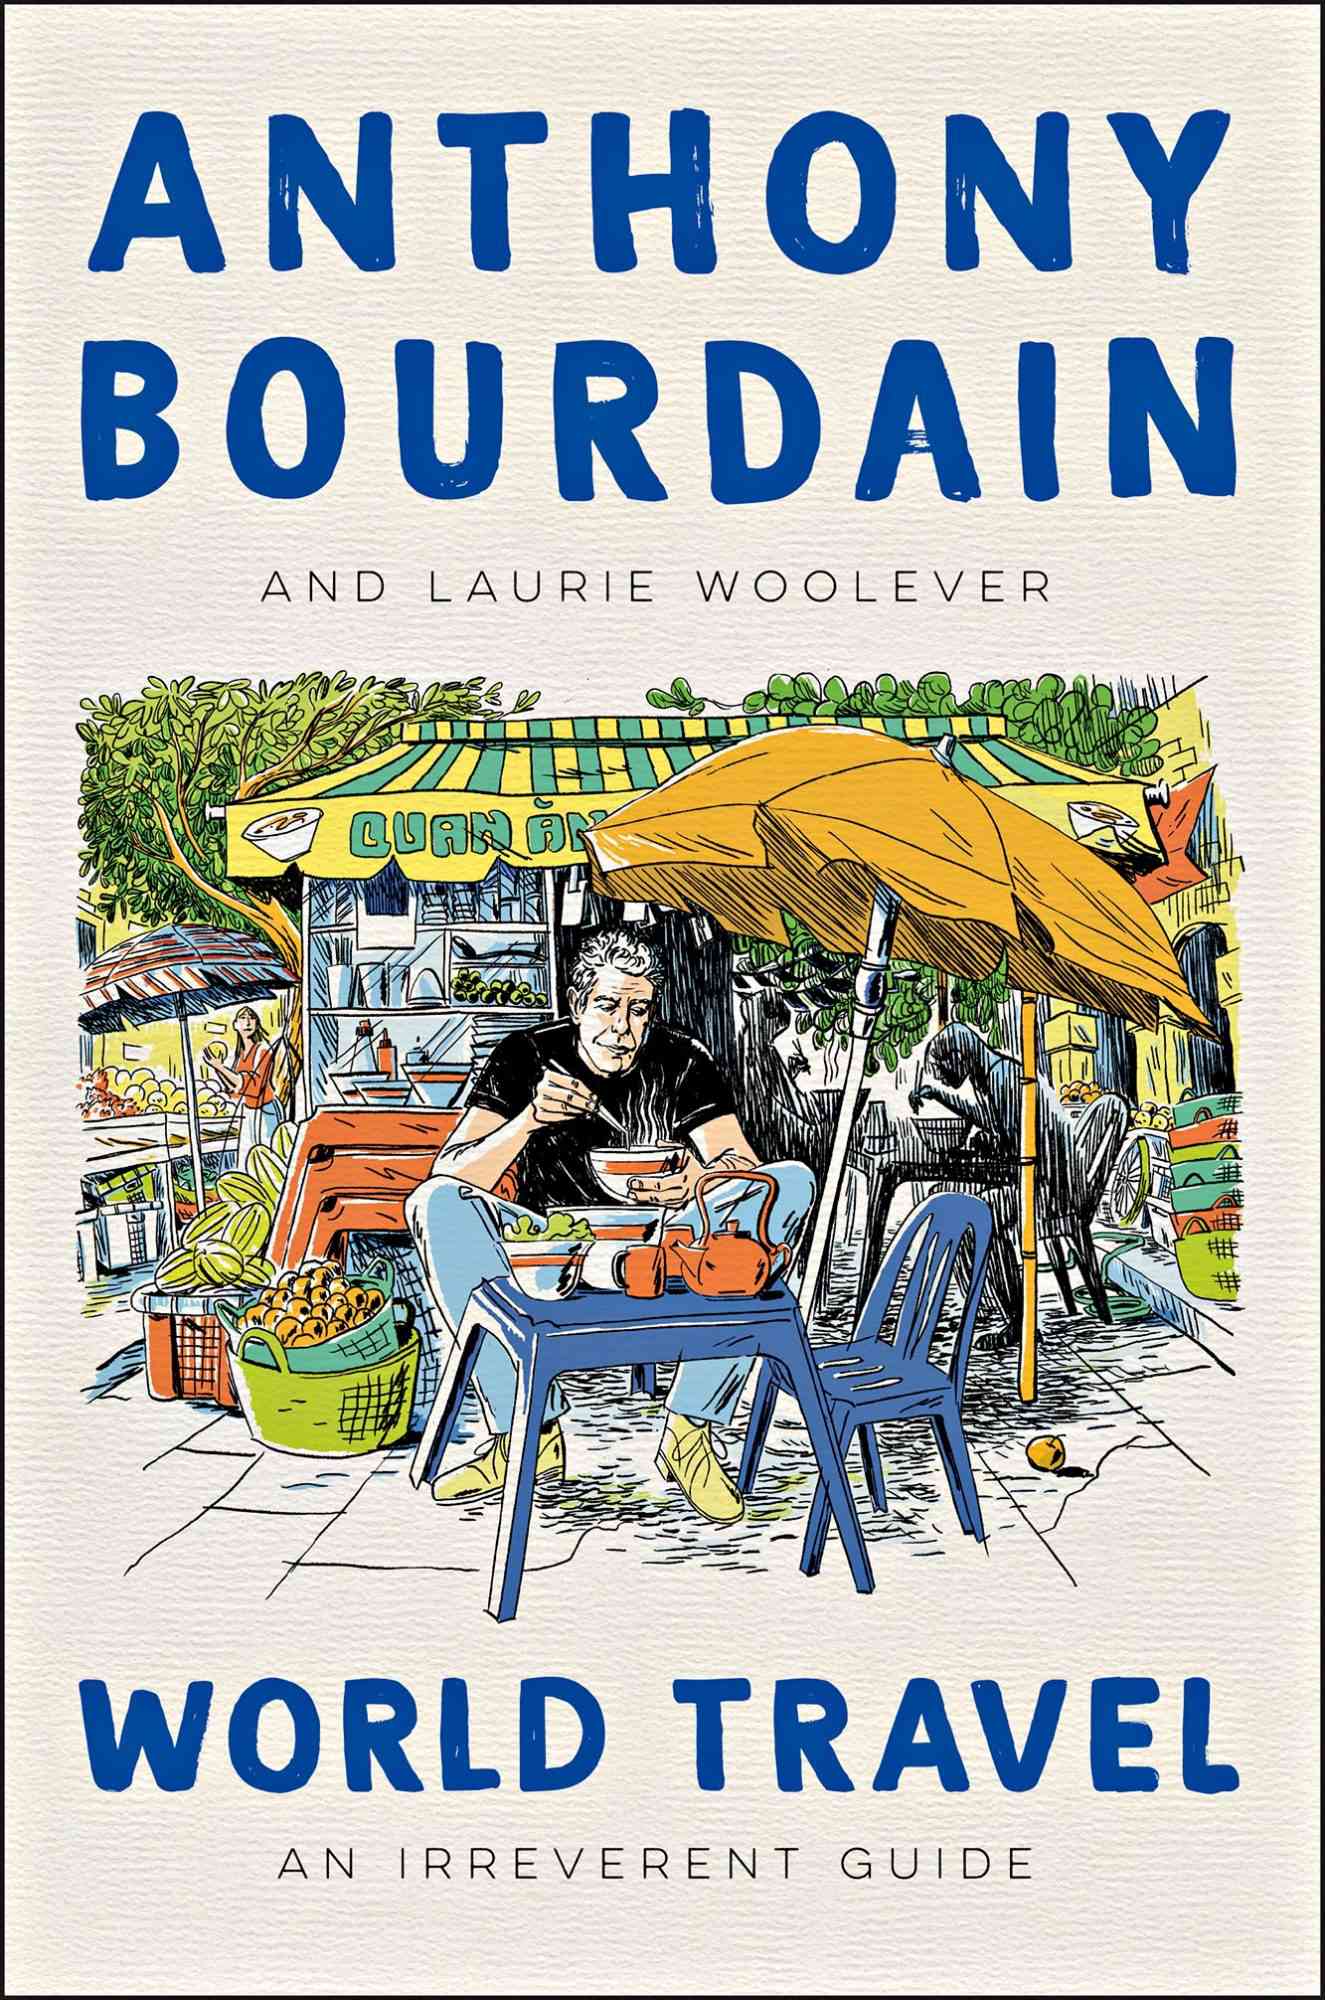 World Travel, by Anthony Bourdain and Laurie Woolever